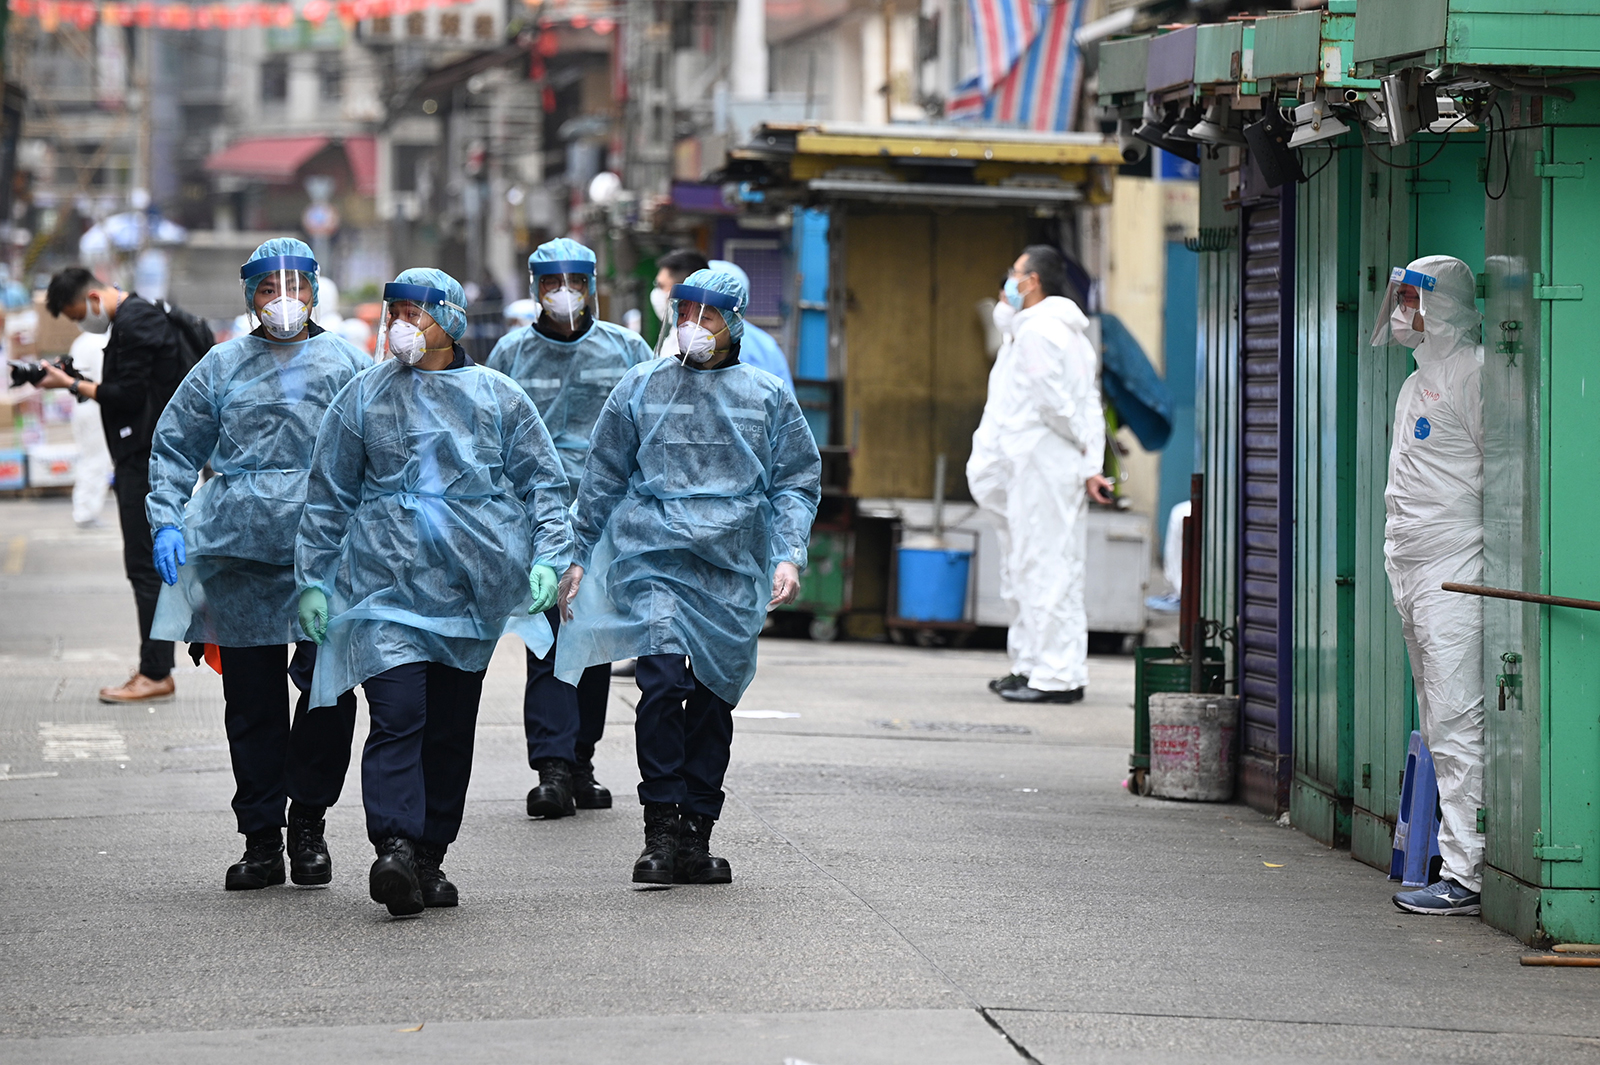 Police patrol the streets while wearing protective gear as authorities continue testing for the second day in the Jordan area of Hong Kong, on January 24.